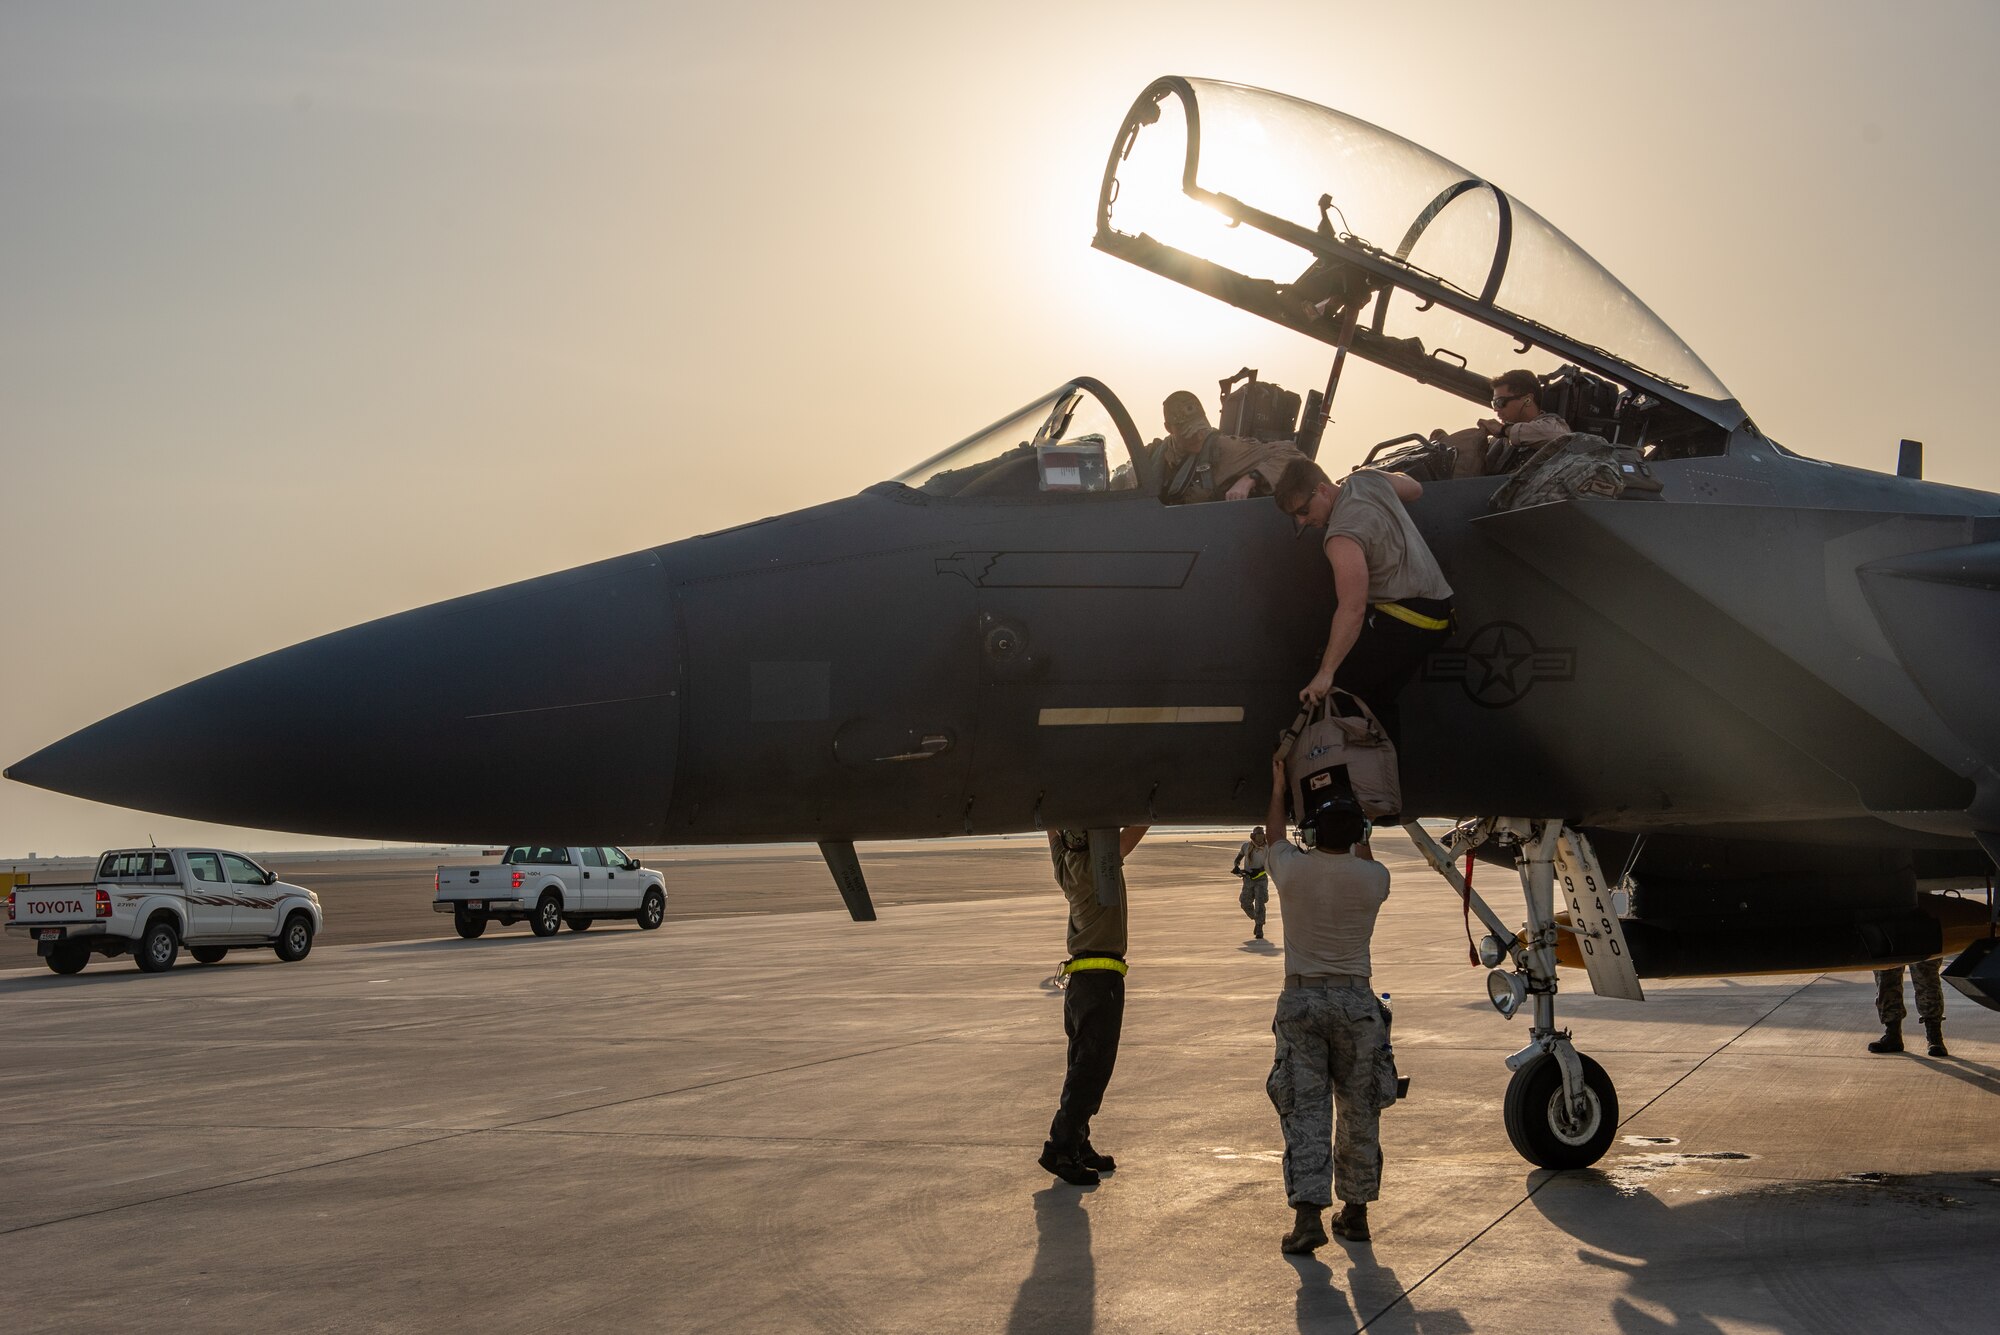 Maintainers newly assigned to the 380th Expeditionary Aircraft Maintenance Squadron, assist pilots arriving from the 336th Fighter Squadron, June 13, 2019, at Al Dhafra Air Base, United Arab Emirates. The aircrew and maintainers deployed from the 4th Fighter Wing at Seymour Johnson Air Force Base, North Carolina, to join Team ADAB’s diverse inventory of air power. (U.S. Air Force photo by Staff Sgt. Chris Thornbury)